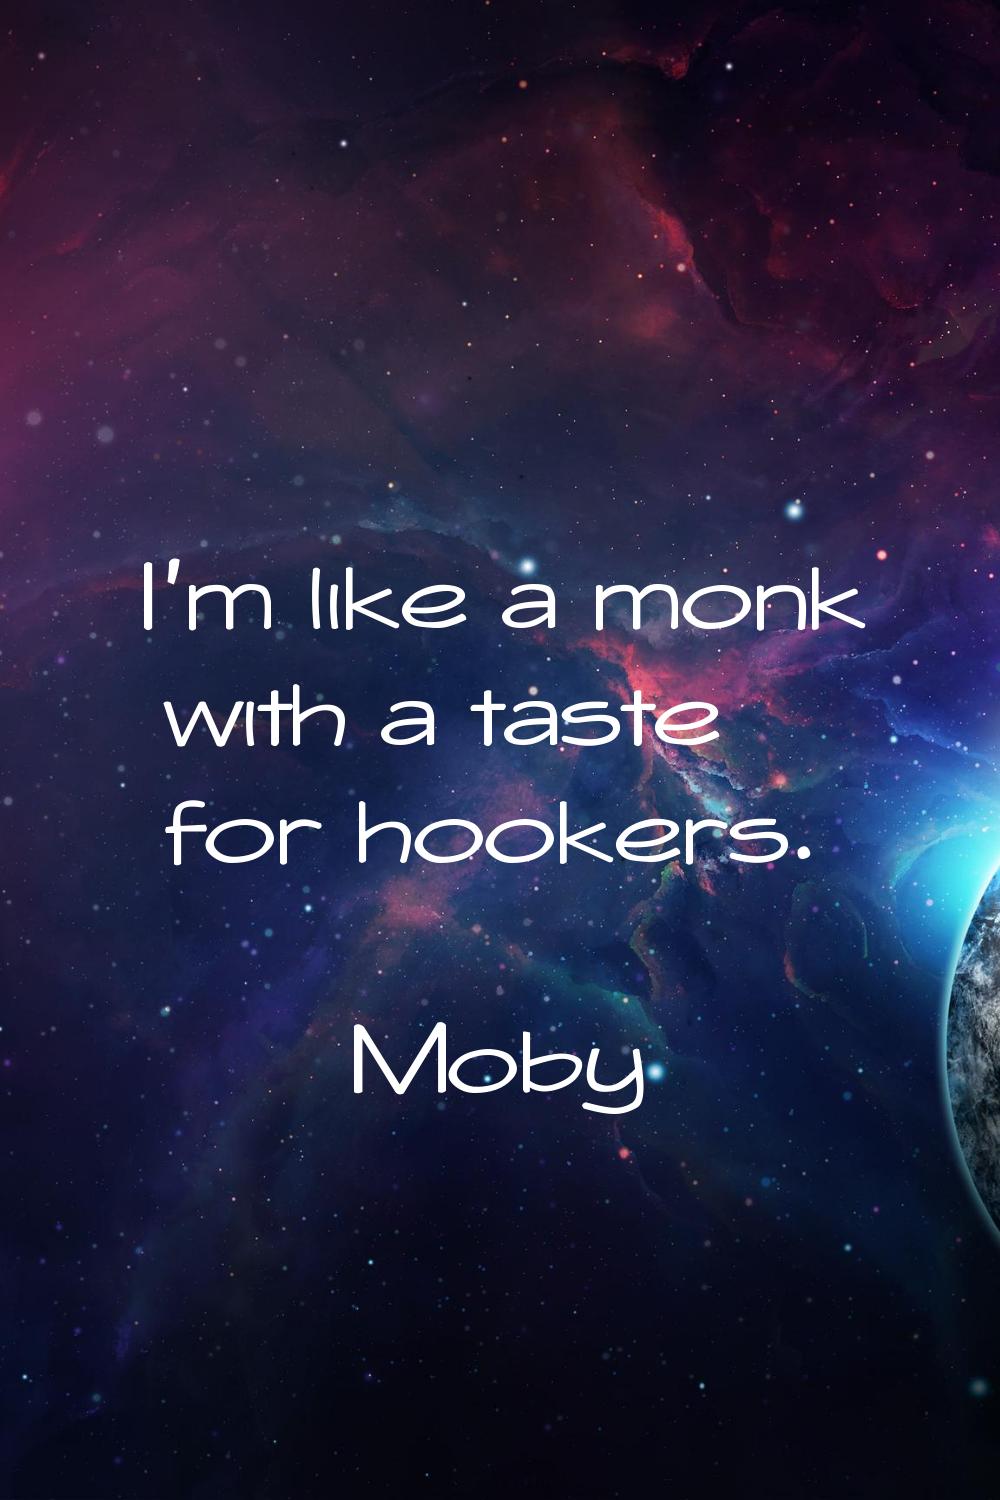 I'm like a monk with a taste for hookers.